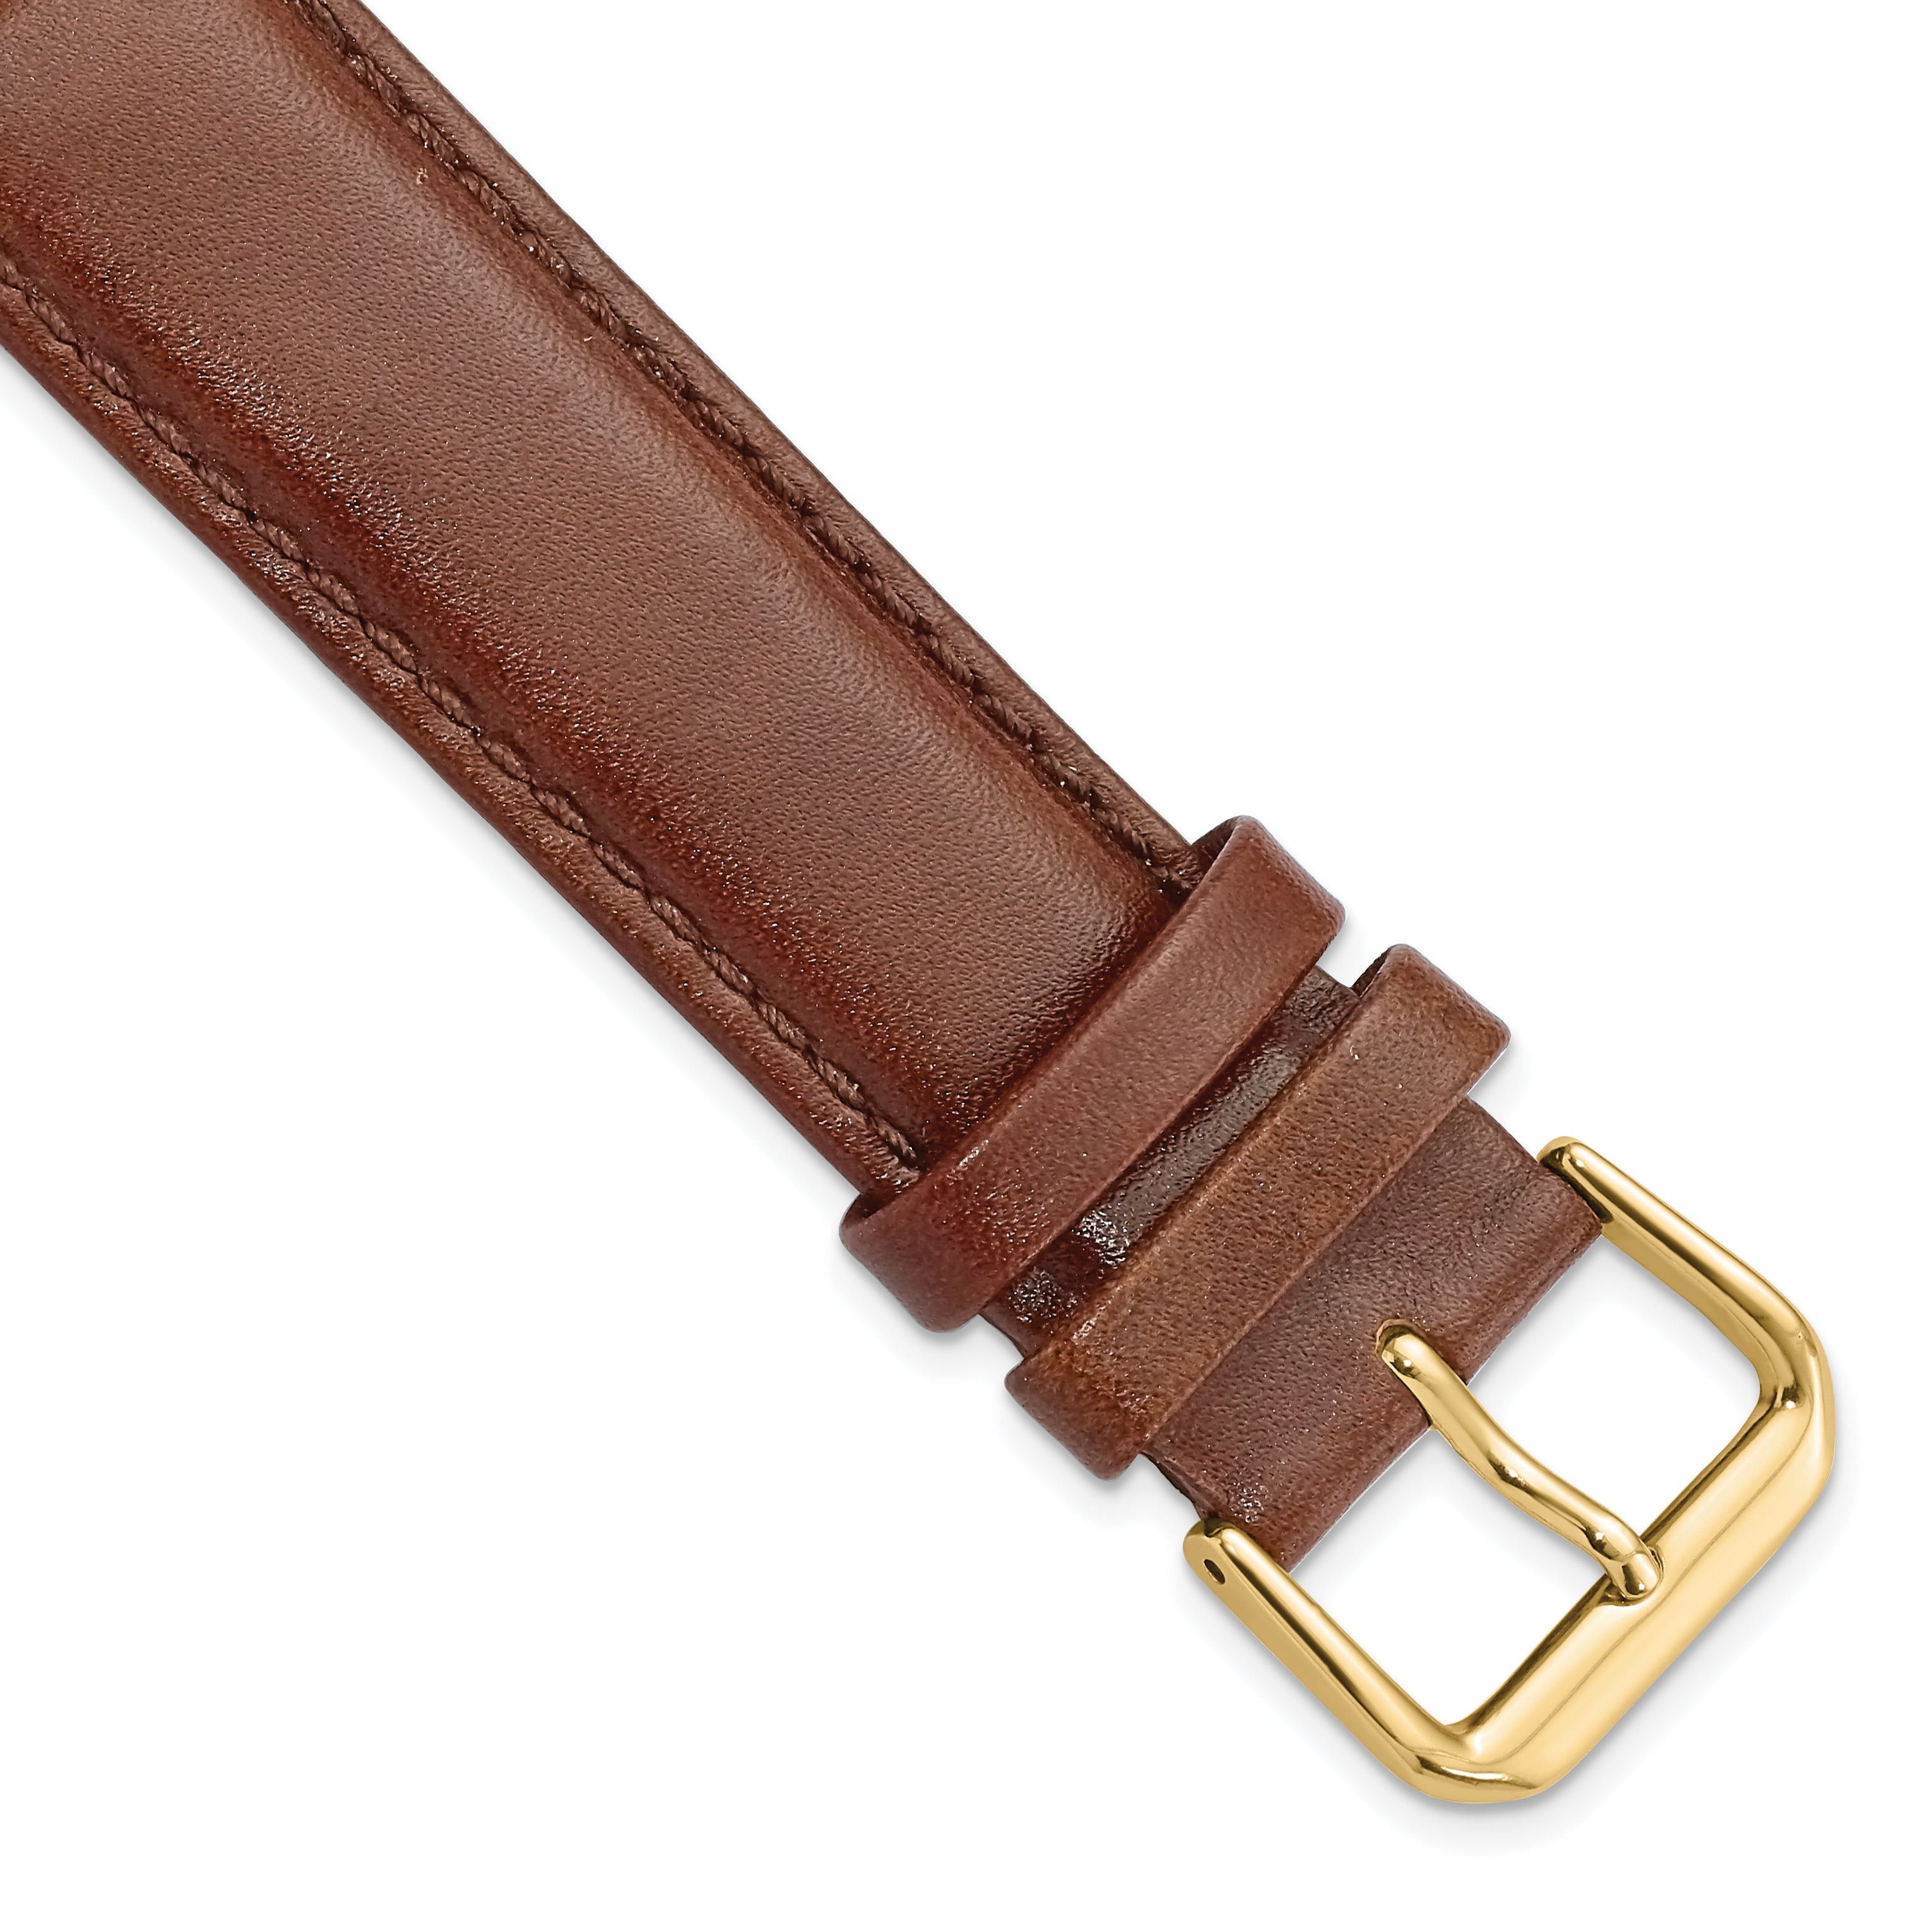 DeBeer 20mm Havana Smooth Leather with Gold-tone Buckle 7.5 inch Watch Band